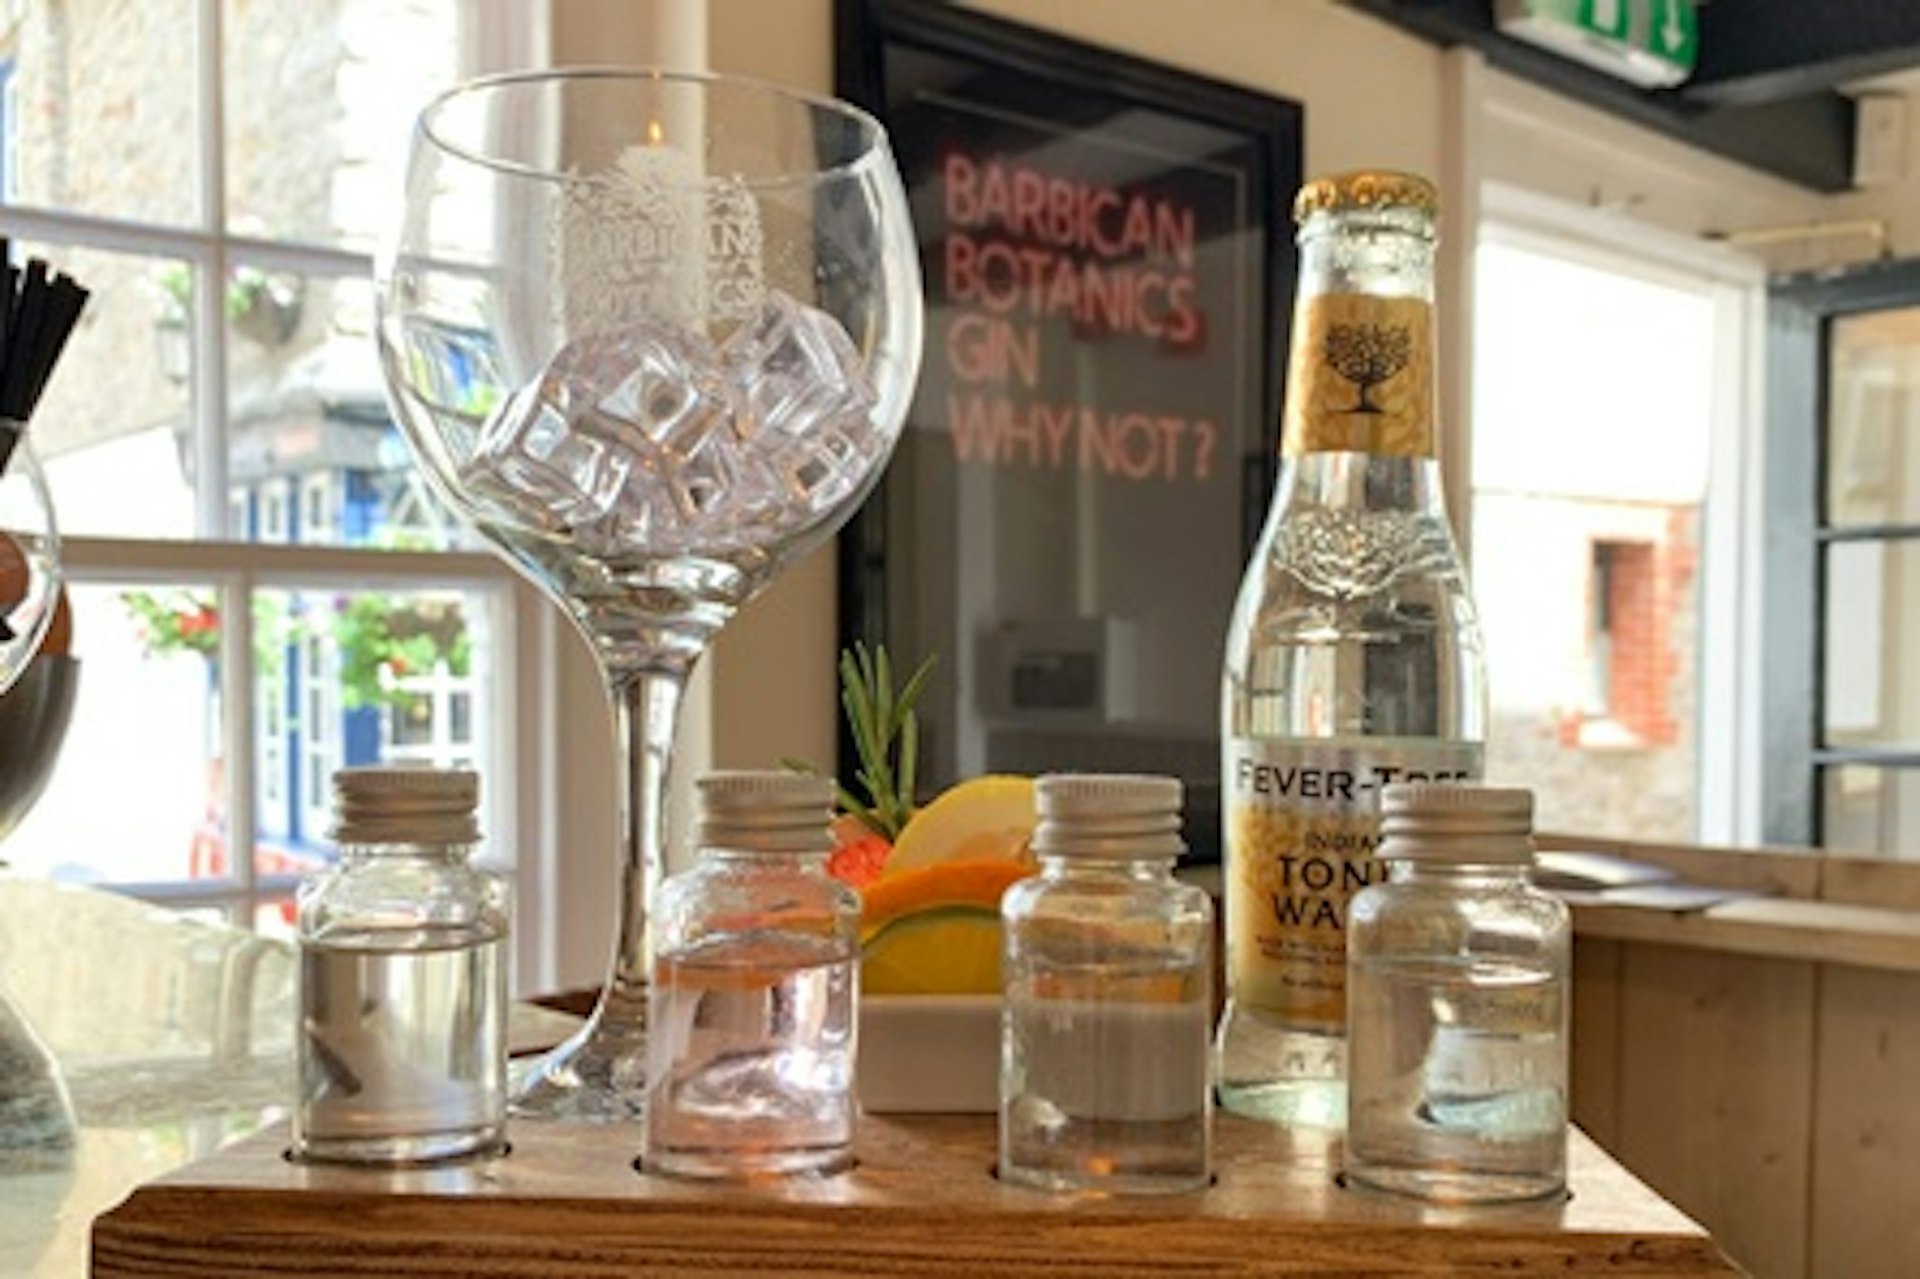 Gin Flight Self-Guided Tasting at Barbican Botanics Gin Room for Two 2